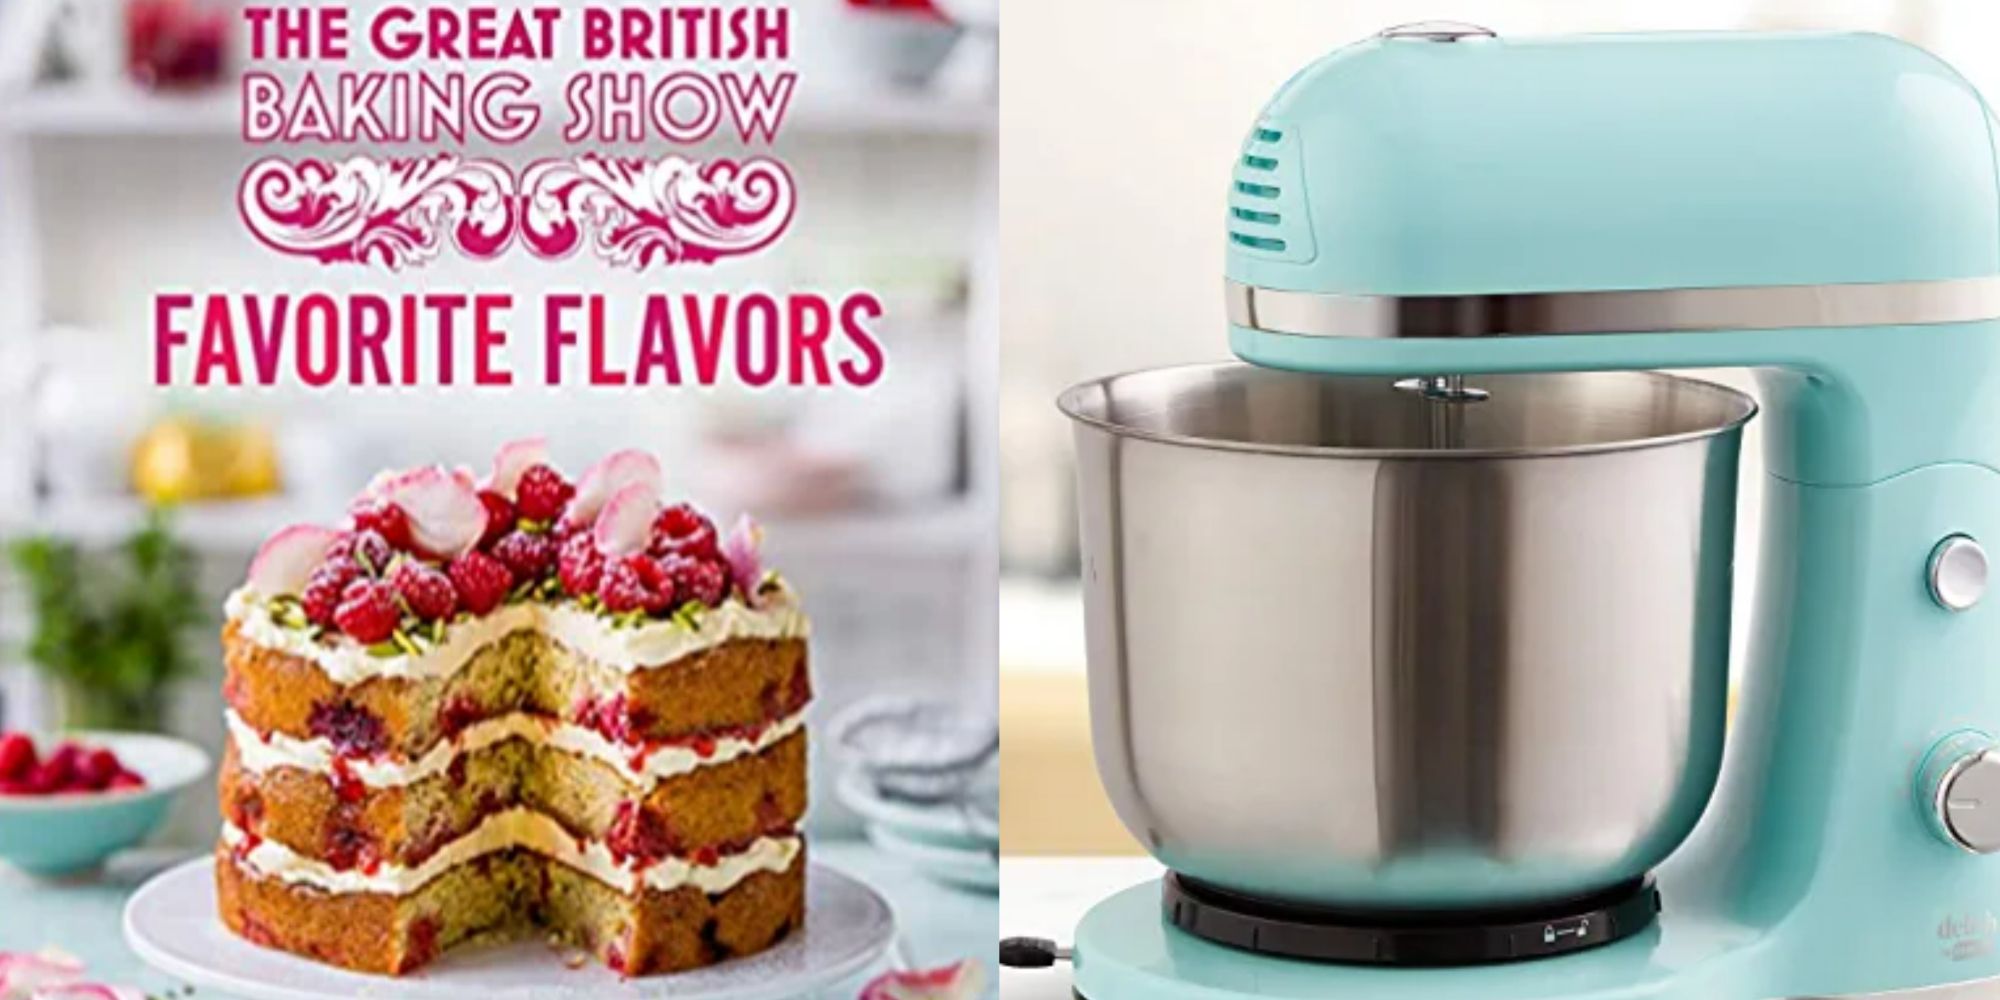 A split image showing a Great British Baking Show cookbook on the left and a Stand mixer on the right available for purchase on Amazon. 